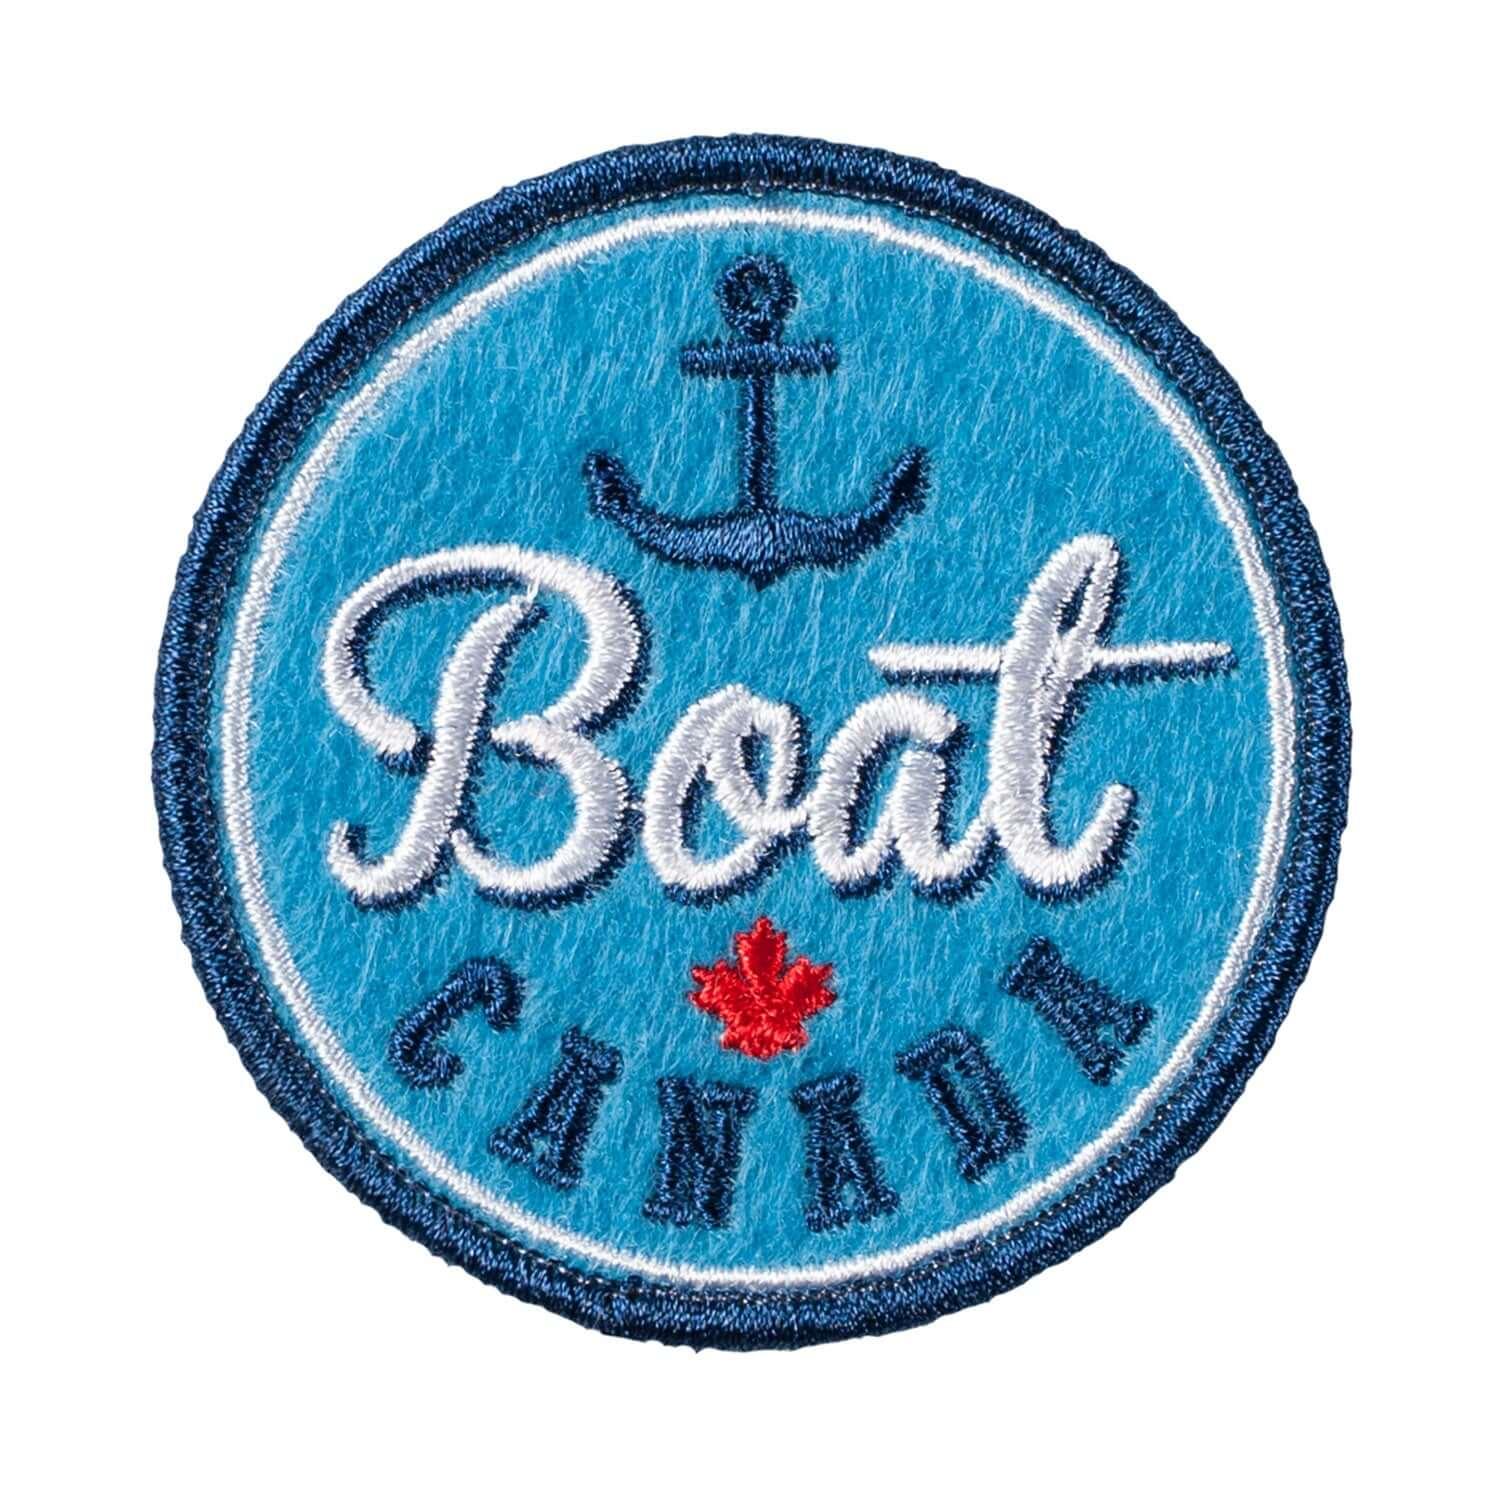 Boat Canada Iron On Patch - Rocket Factory Apparel